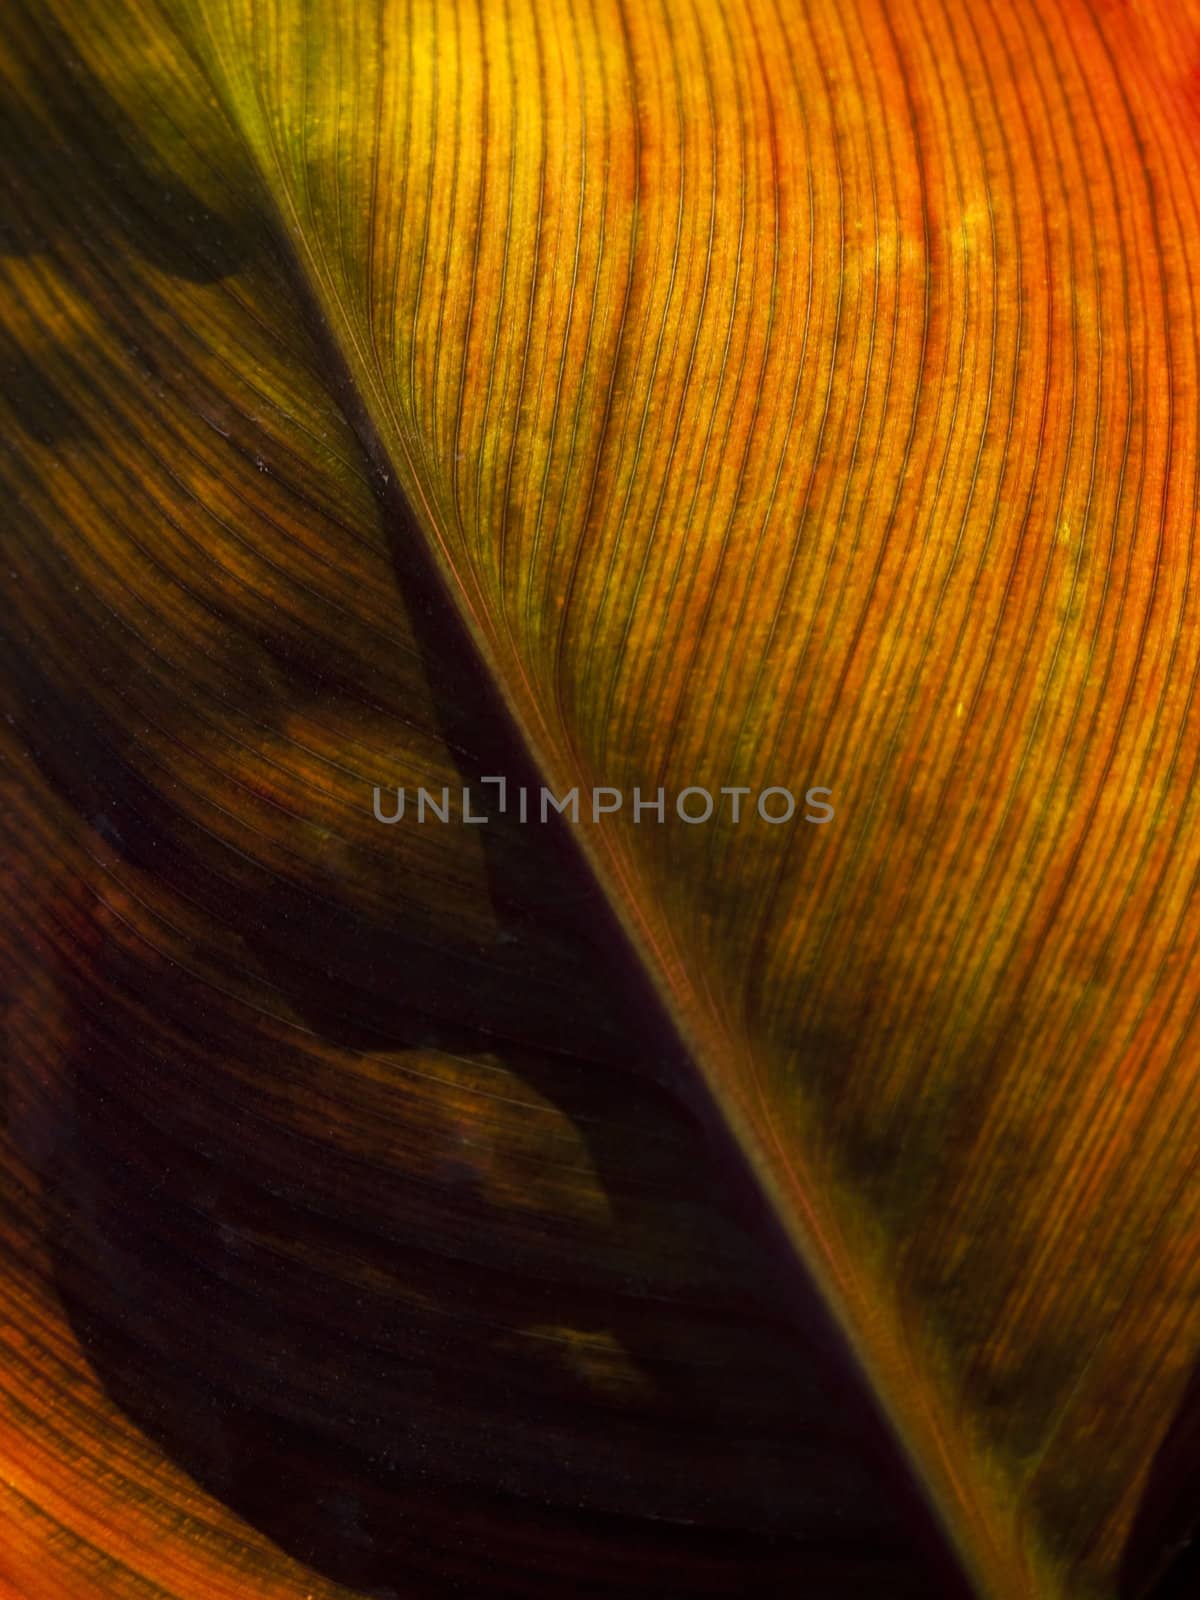 Leaf Abstract by PhotoWorks